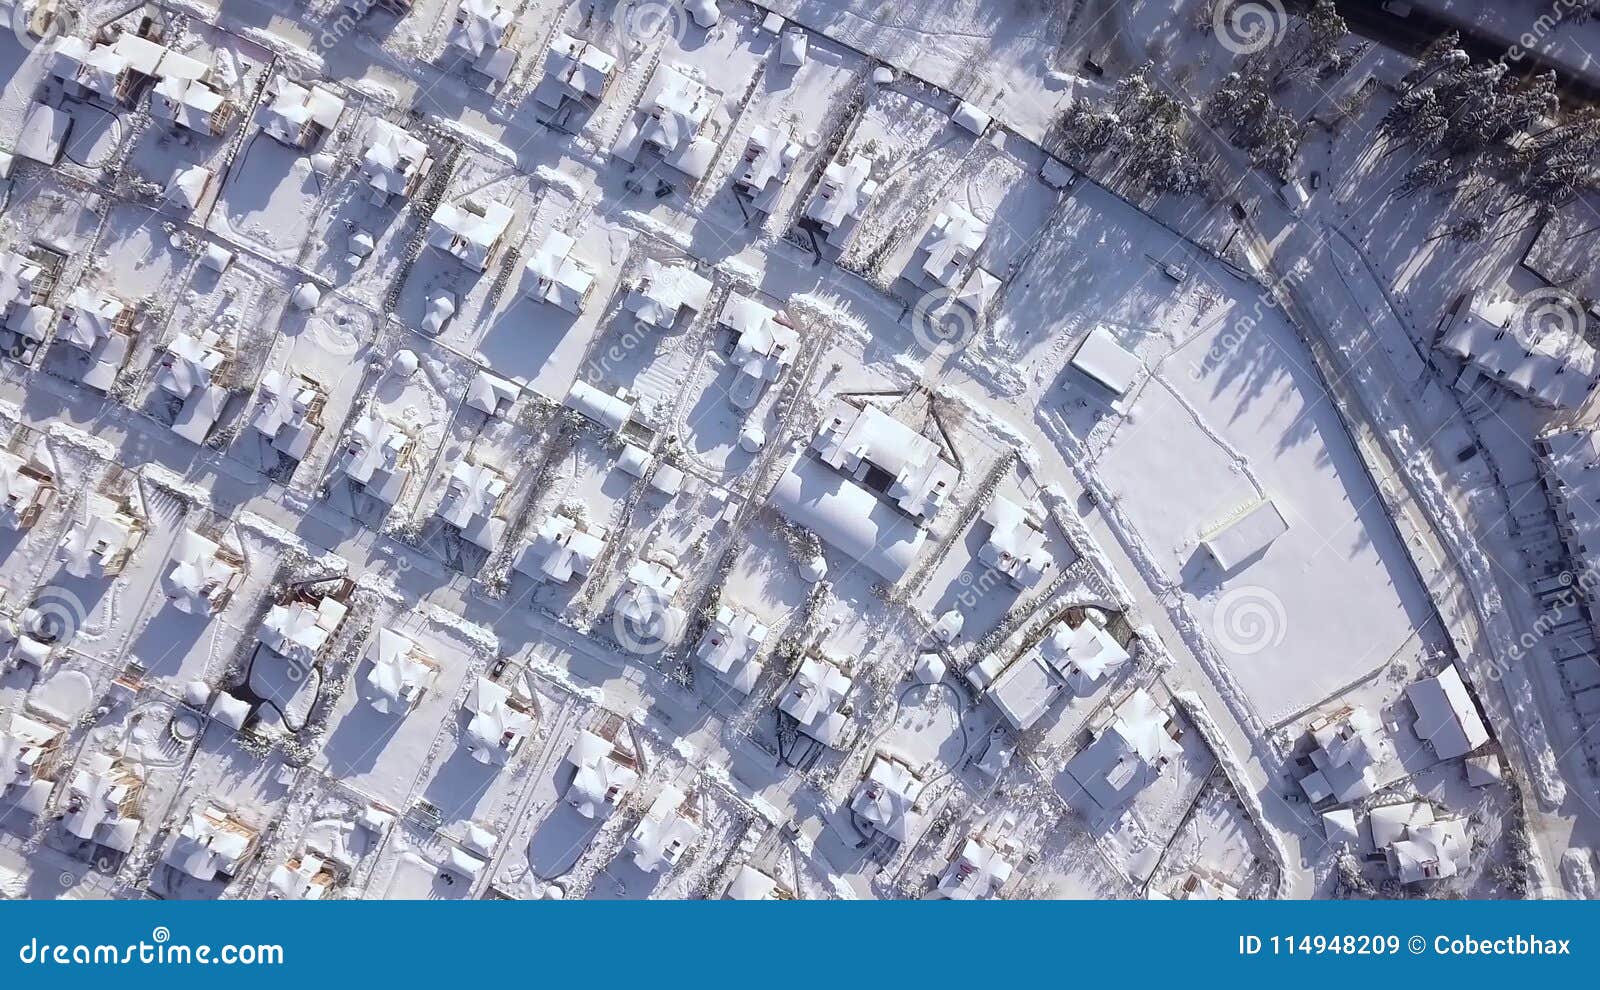 Luxury Houses In Cottage Village On Winter Landscape View From